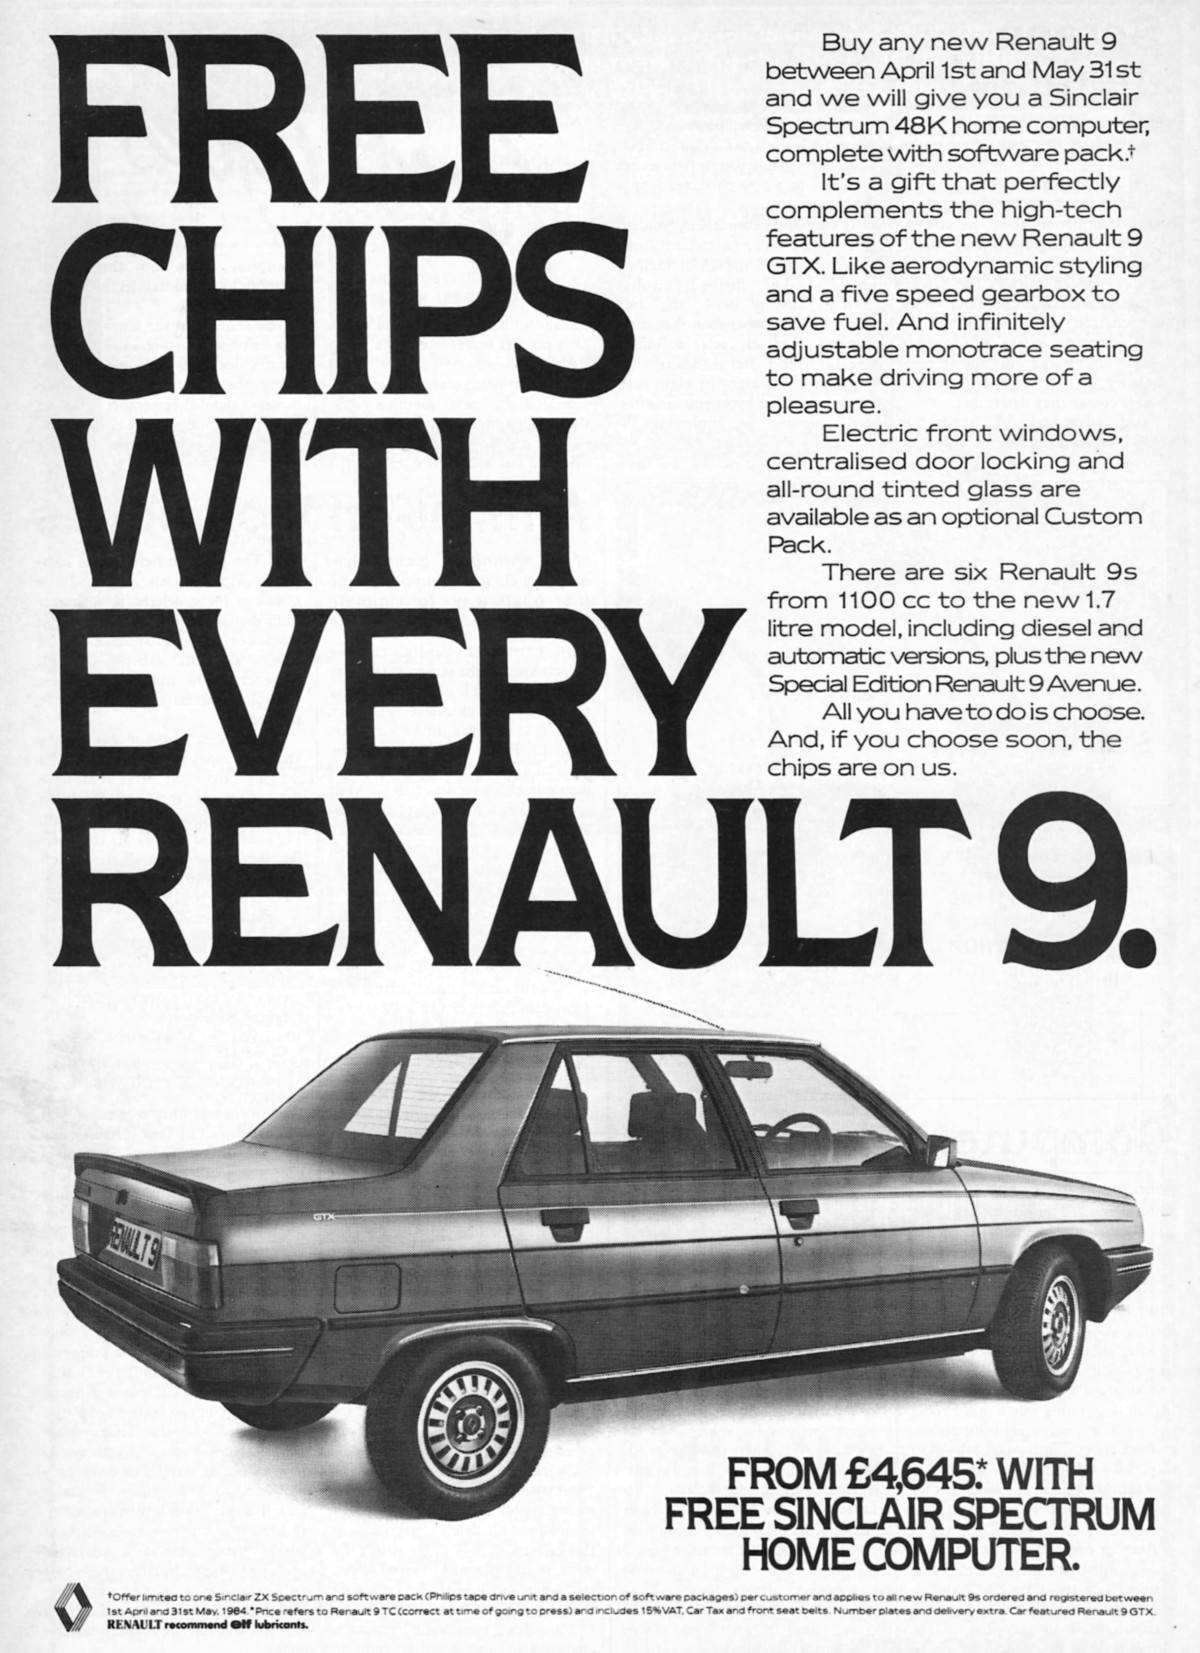 Cars and micros seemed to be a popular thing, as this advert for a Renault 9 shows. Buy the car, get a 48K Spectrum, complete with tape recorder and software pack, for free. From Your Computer, May 1984.